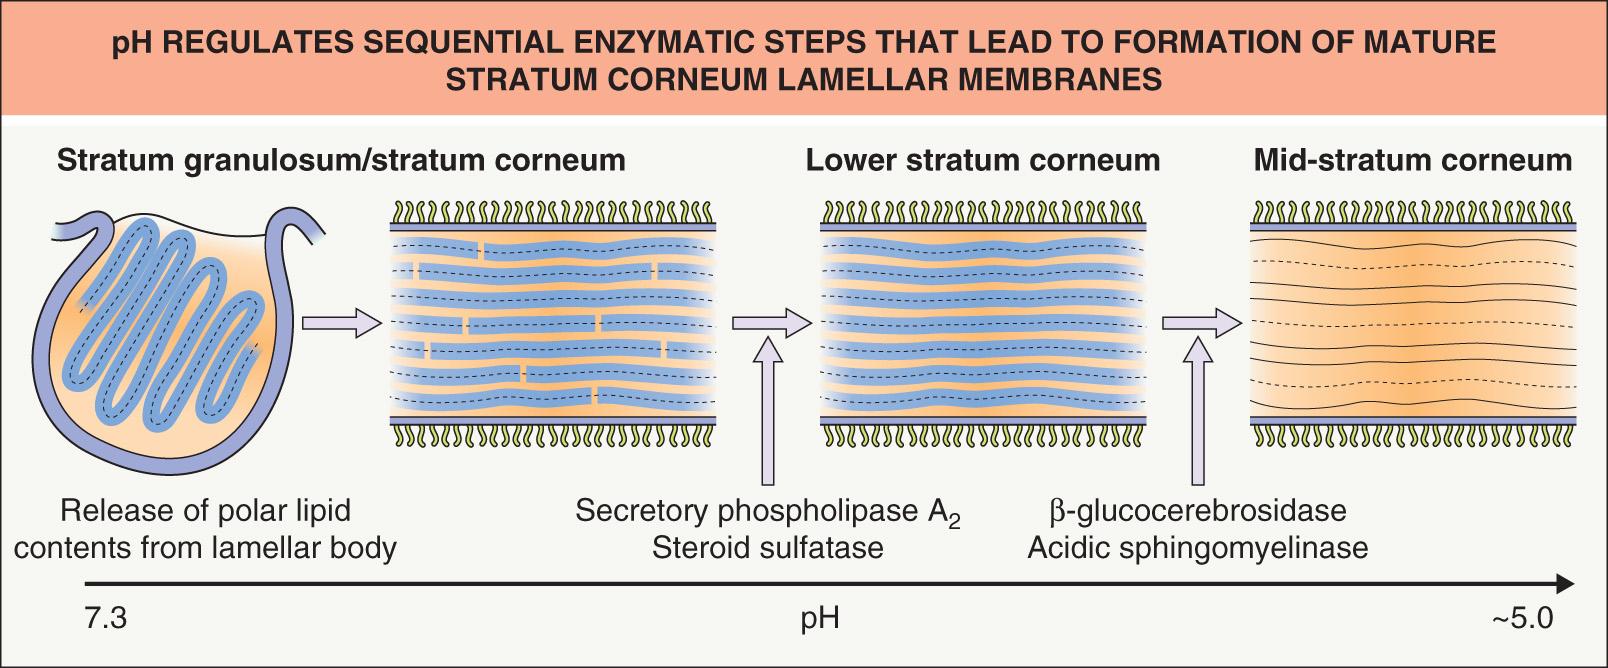 Fig. 124.4, pH regulates sequential enzymatic steps that lead to formation of mature stratum corneum lamellar membranes.